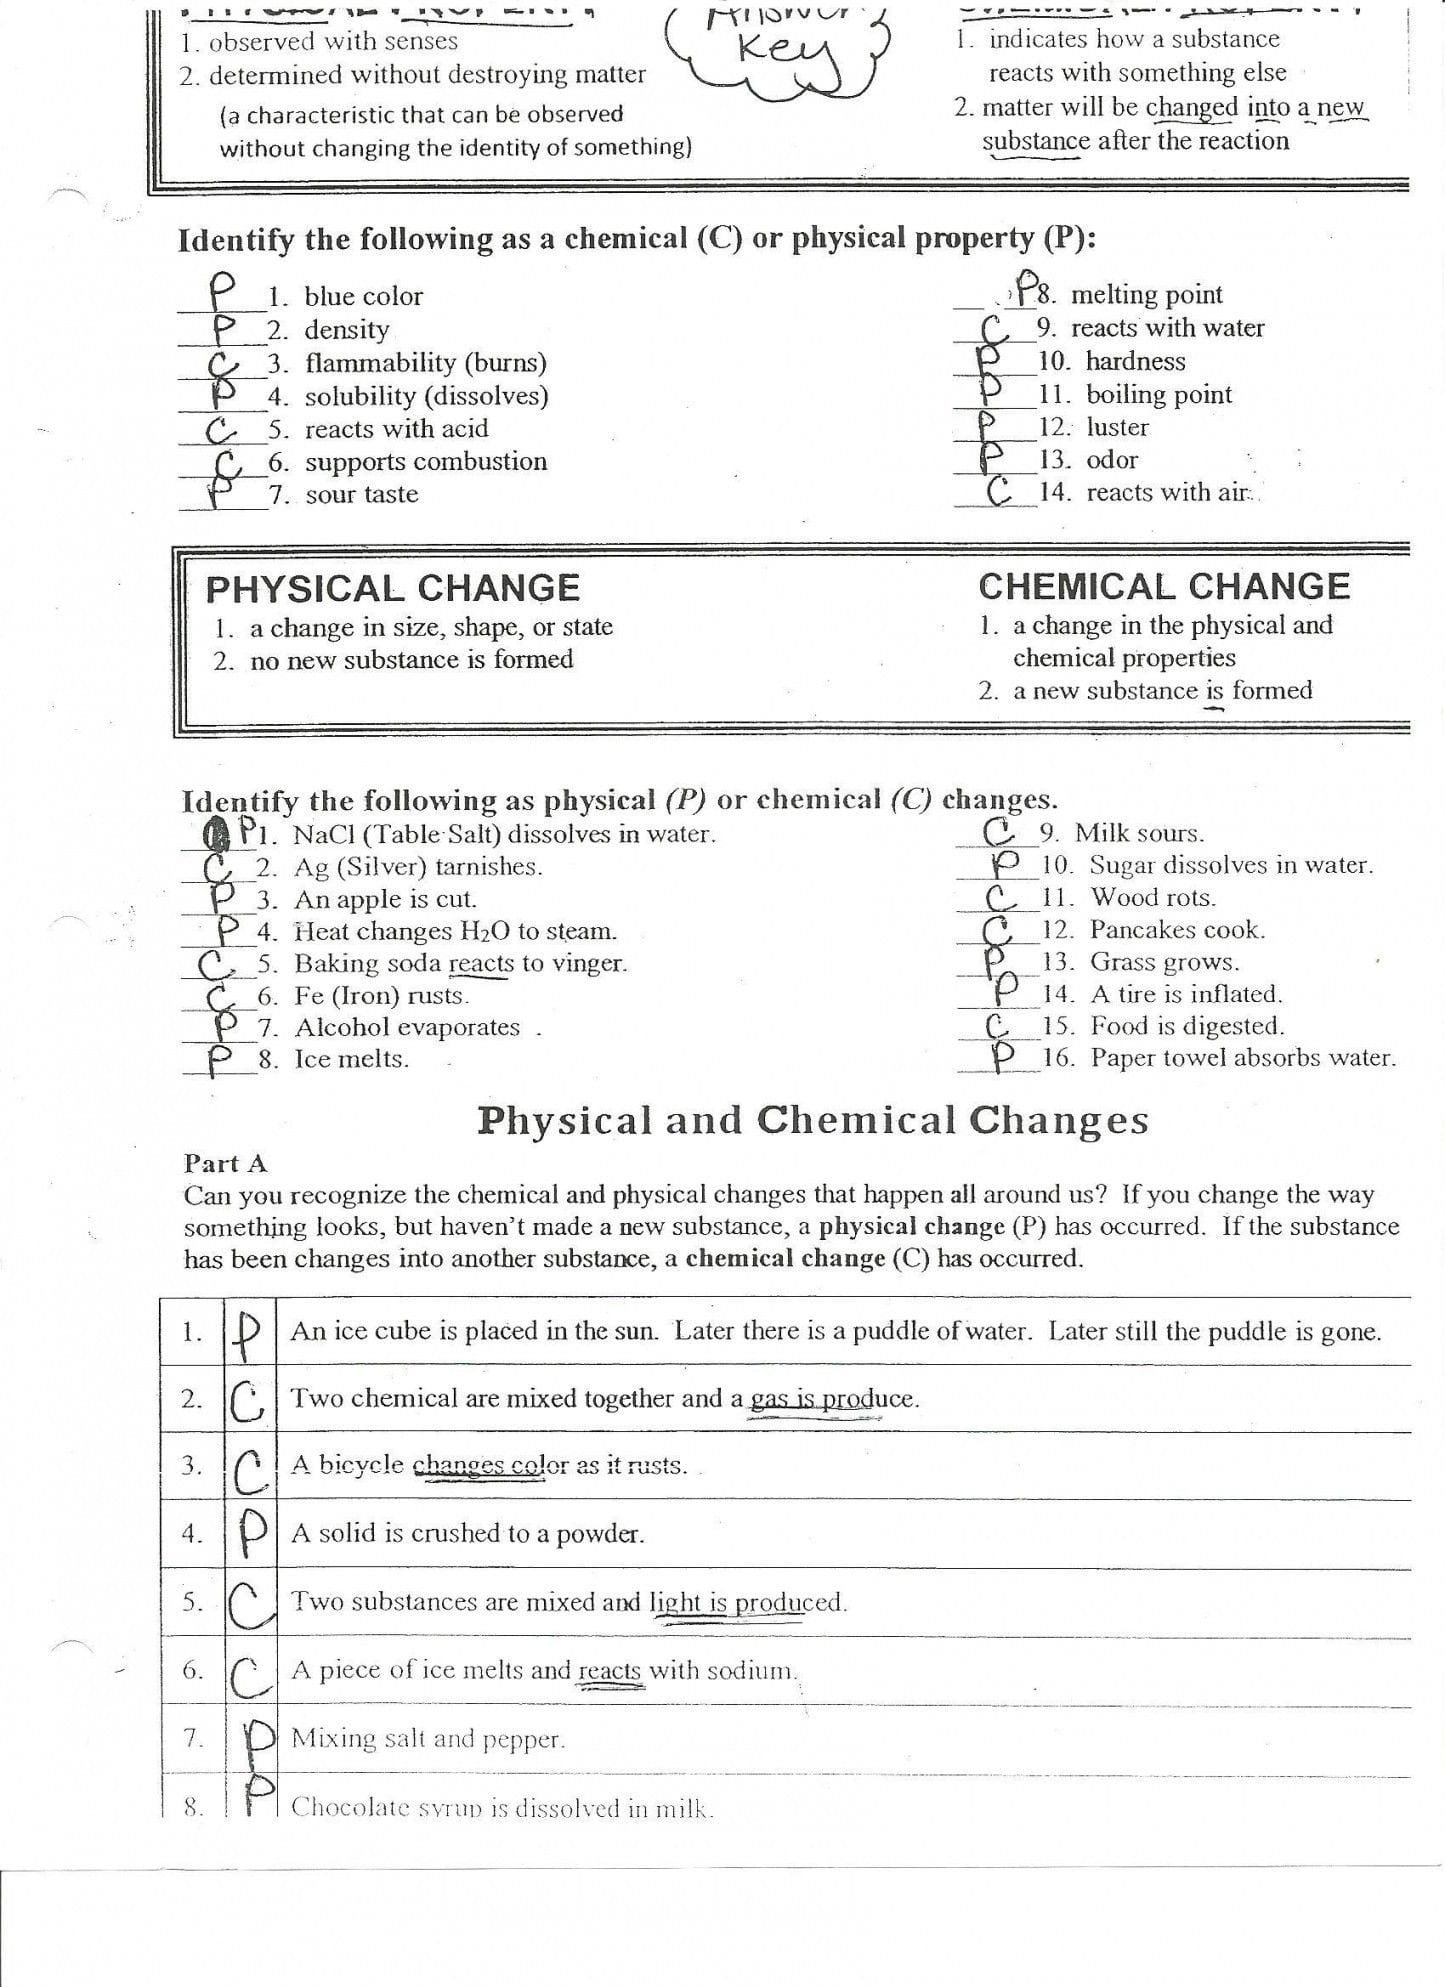 Physical And Chemical Properties Worksheet